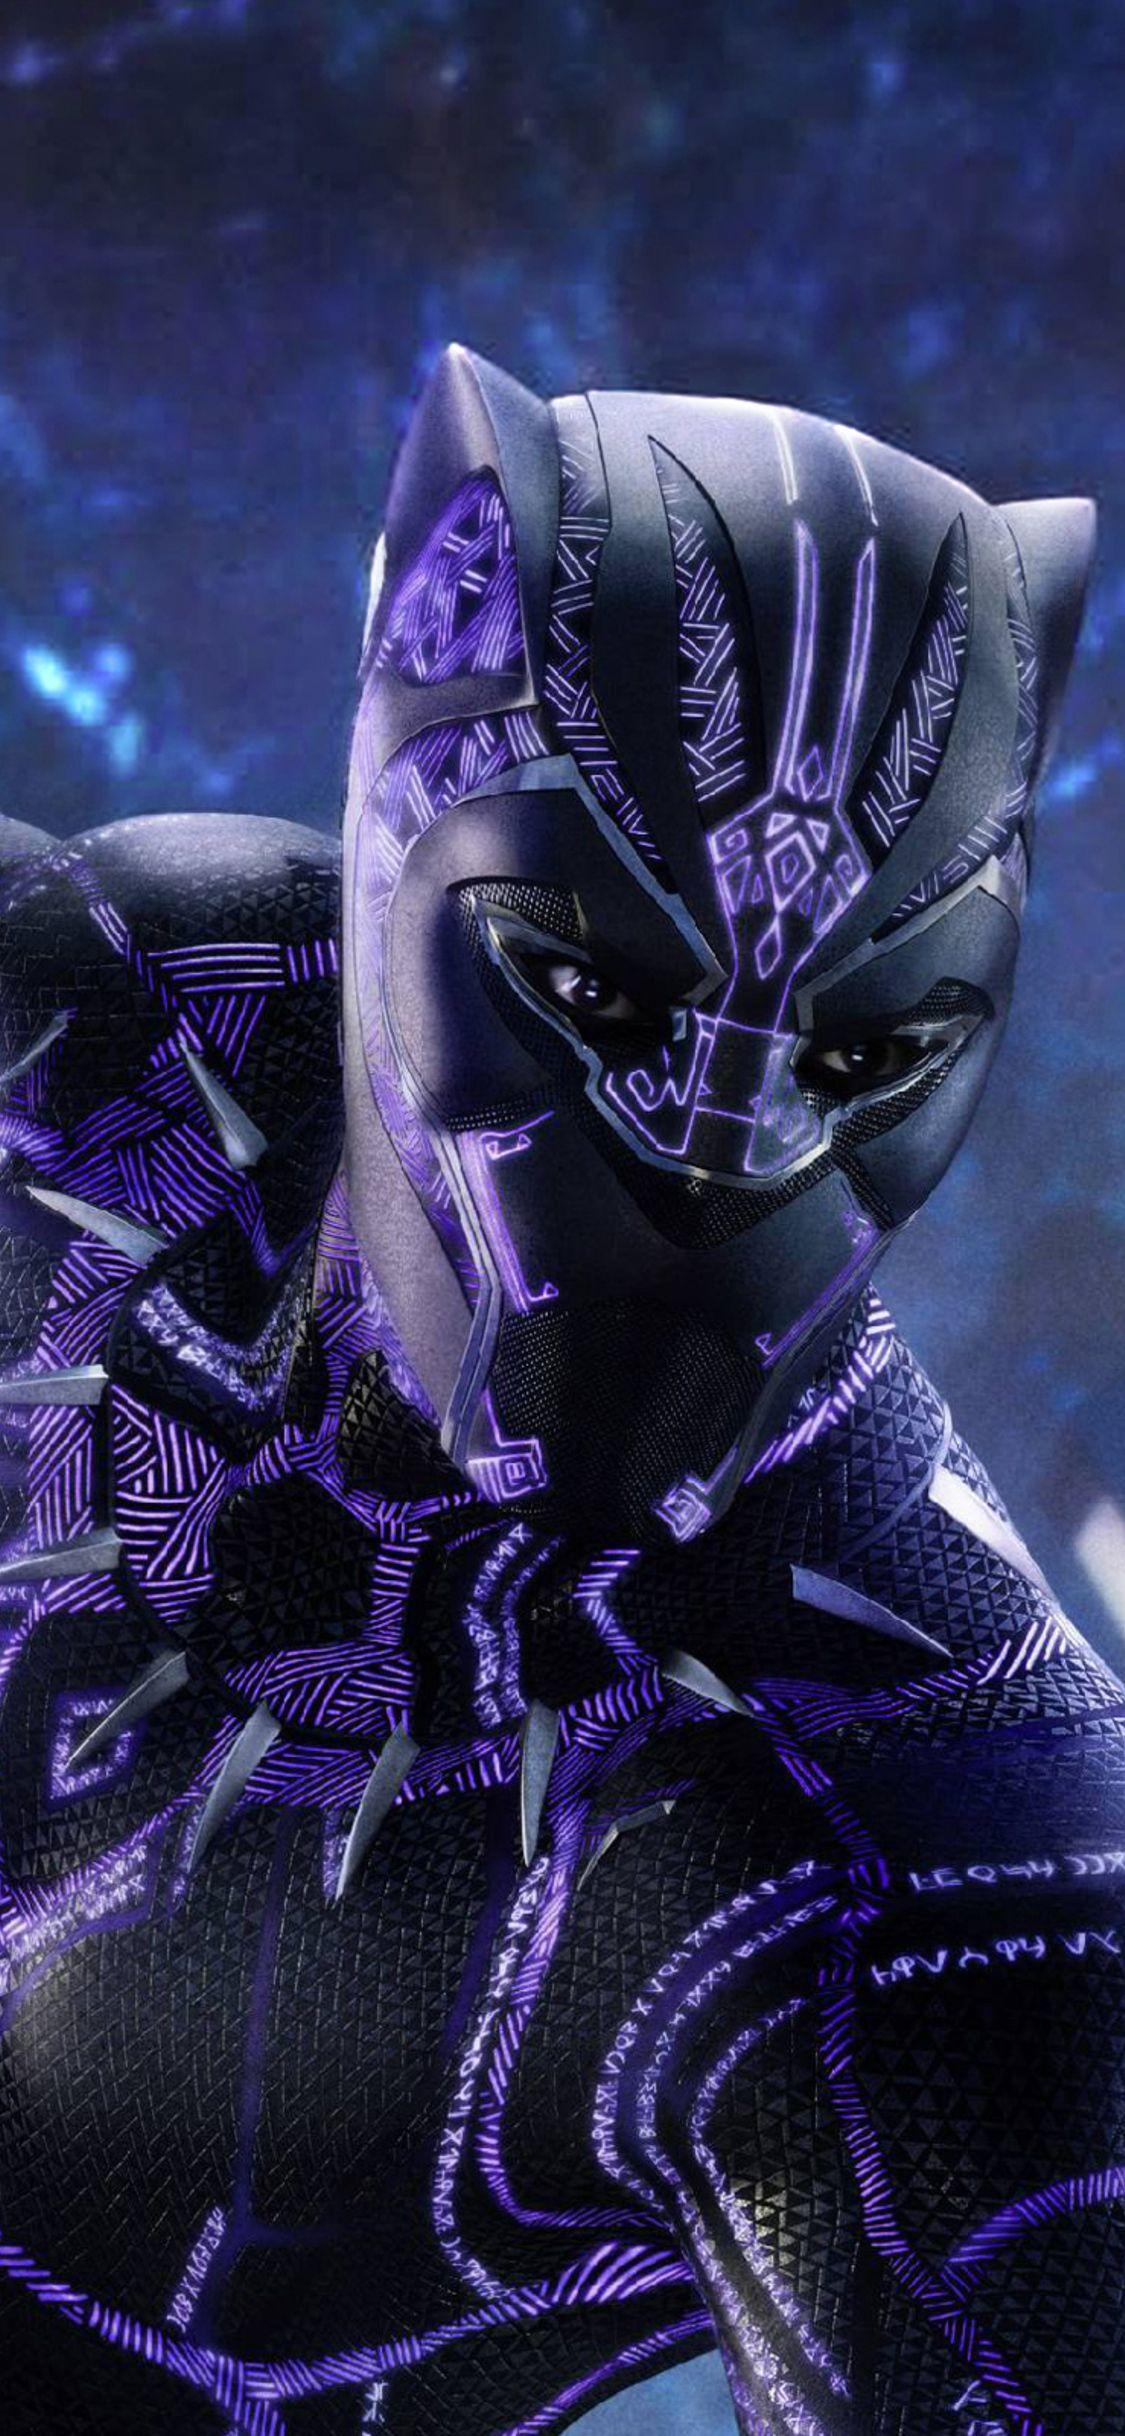 Black Panther in Purple Colour | Black panther marvel, Black panther,  Marvel spiderman art